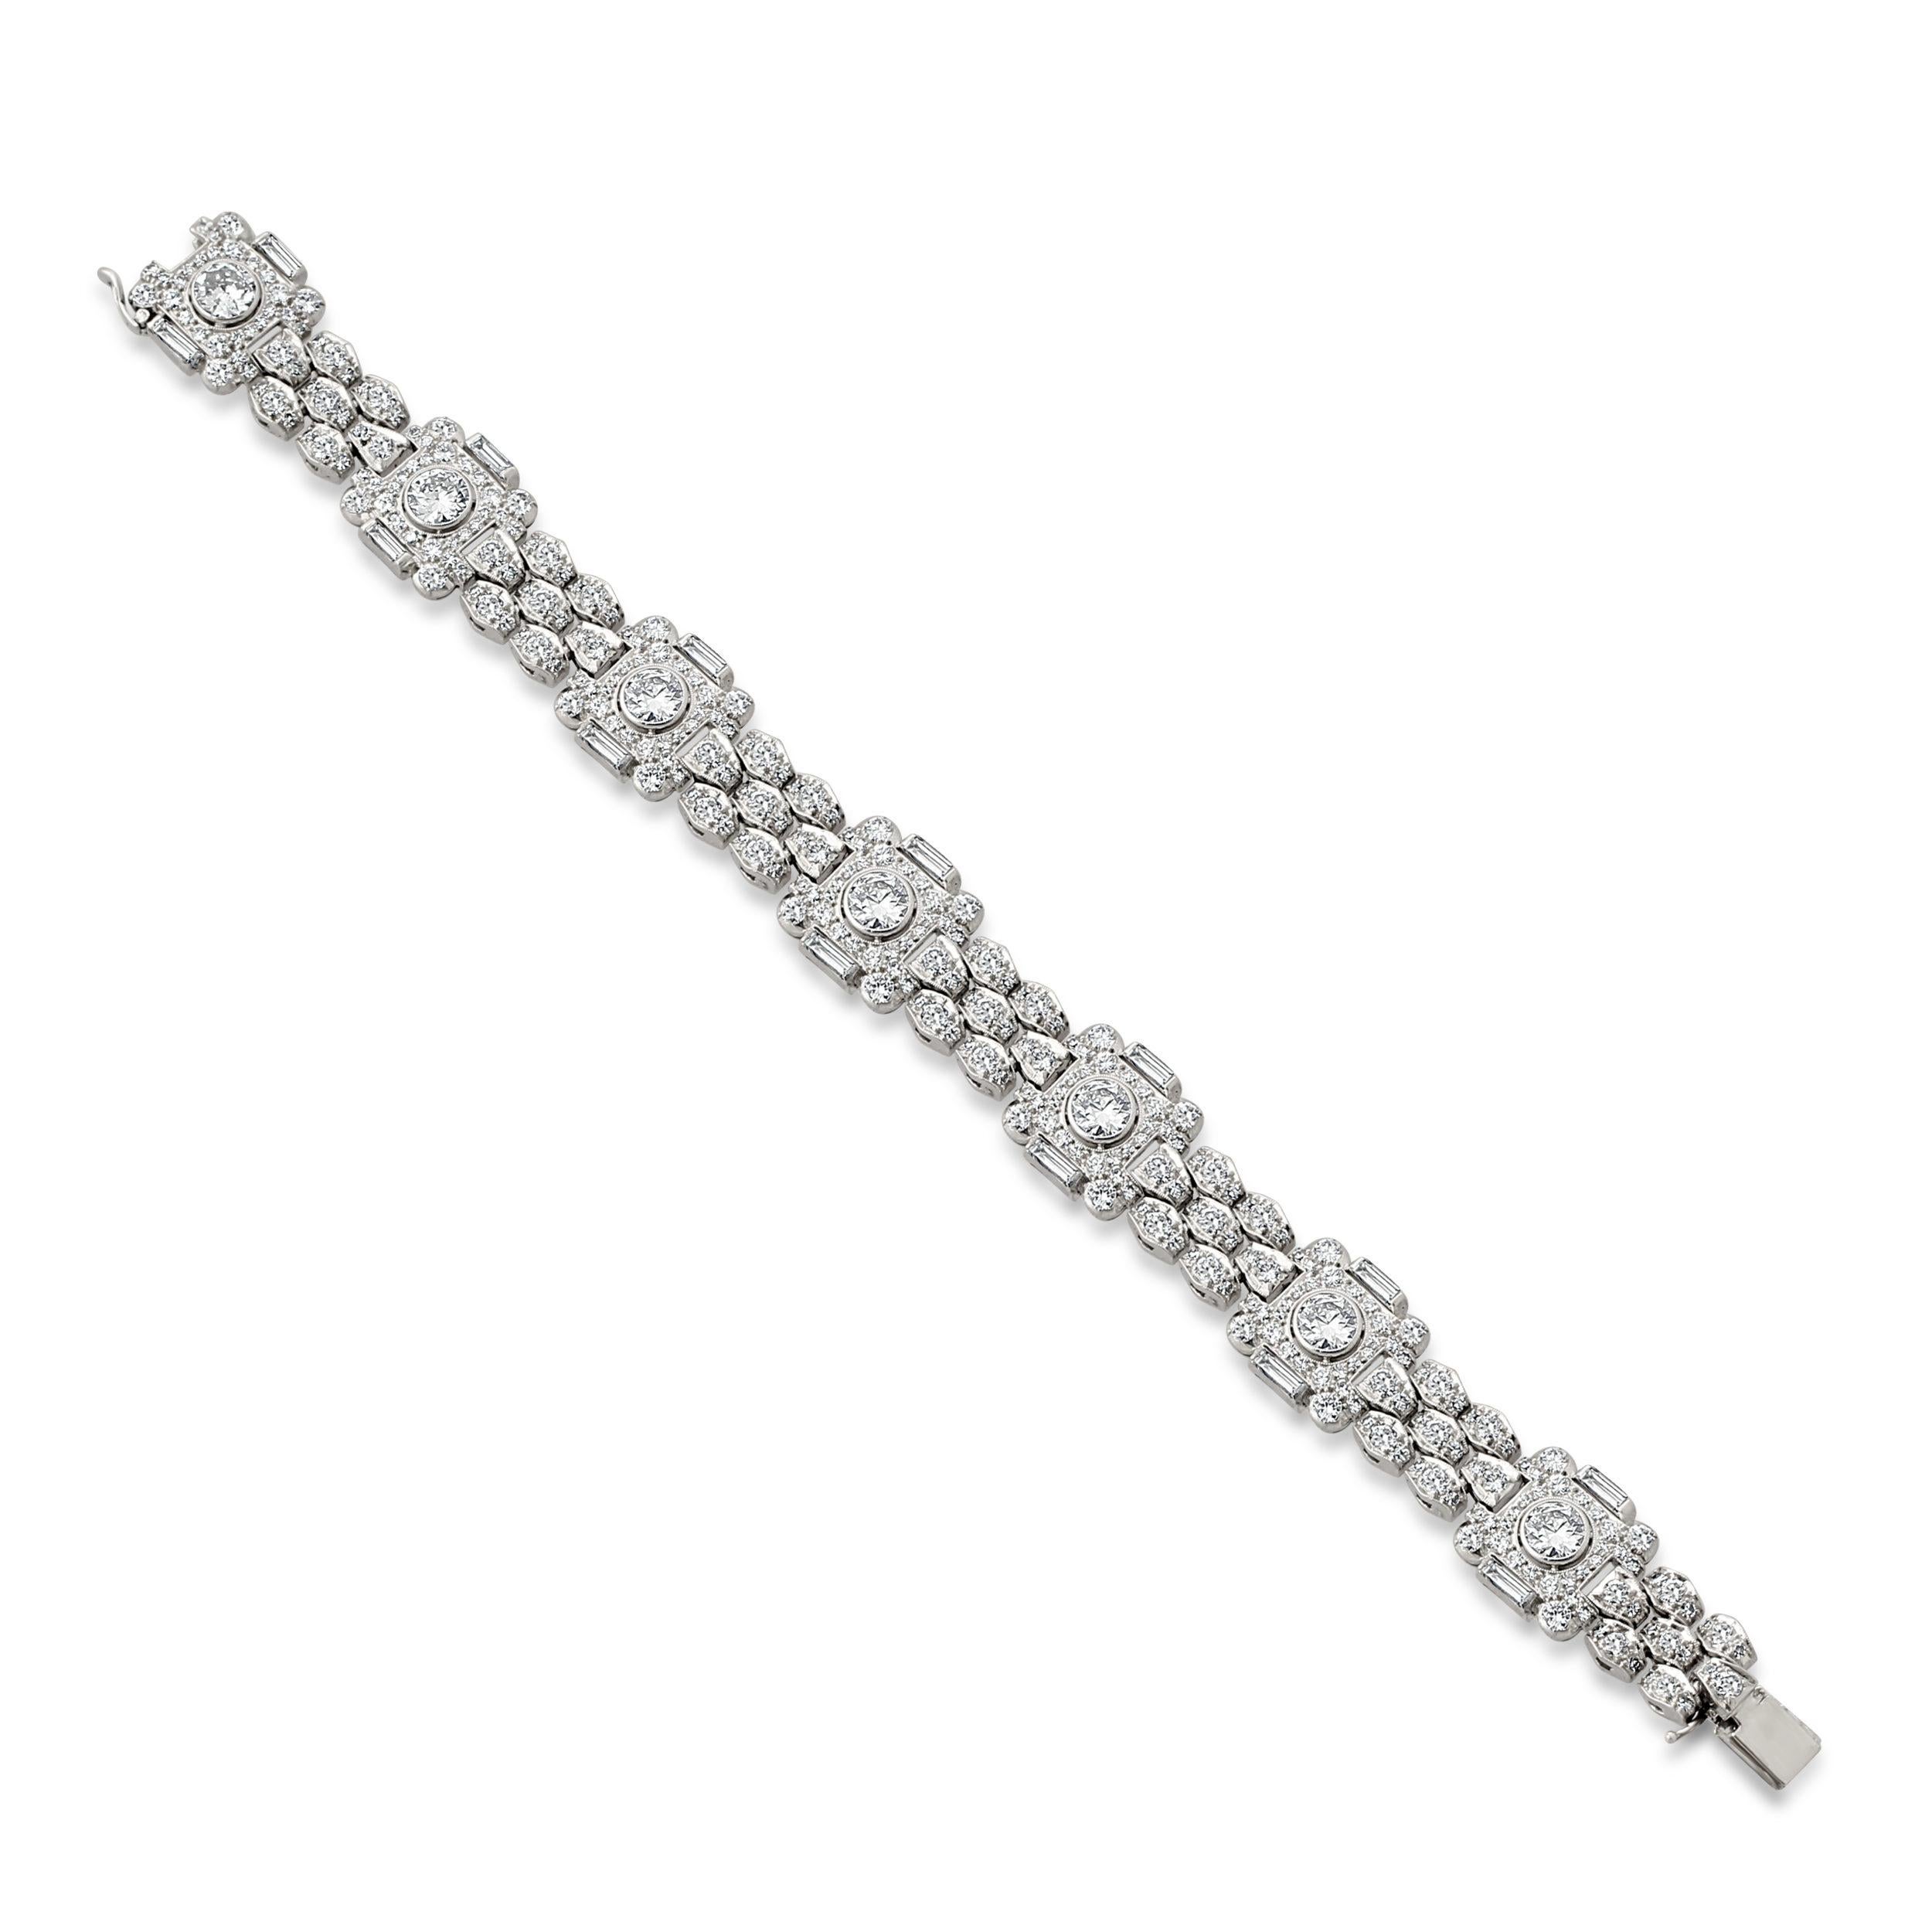 A beautiful 1930s platinum and diamond bracelet. Set with approximately 15 carats of diamonds in flexible links.  Length = 18cm, Width = 1.5cm